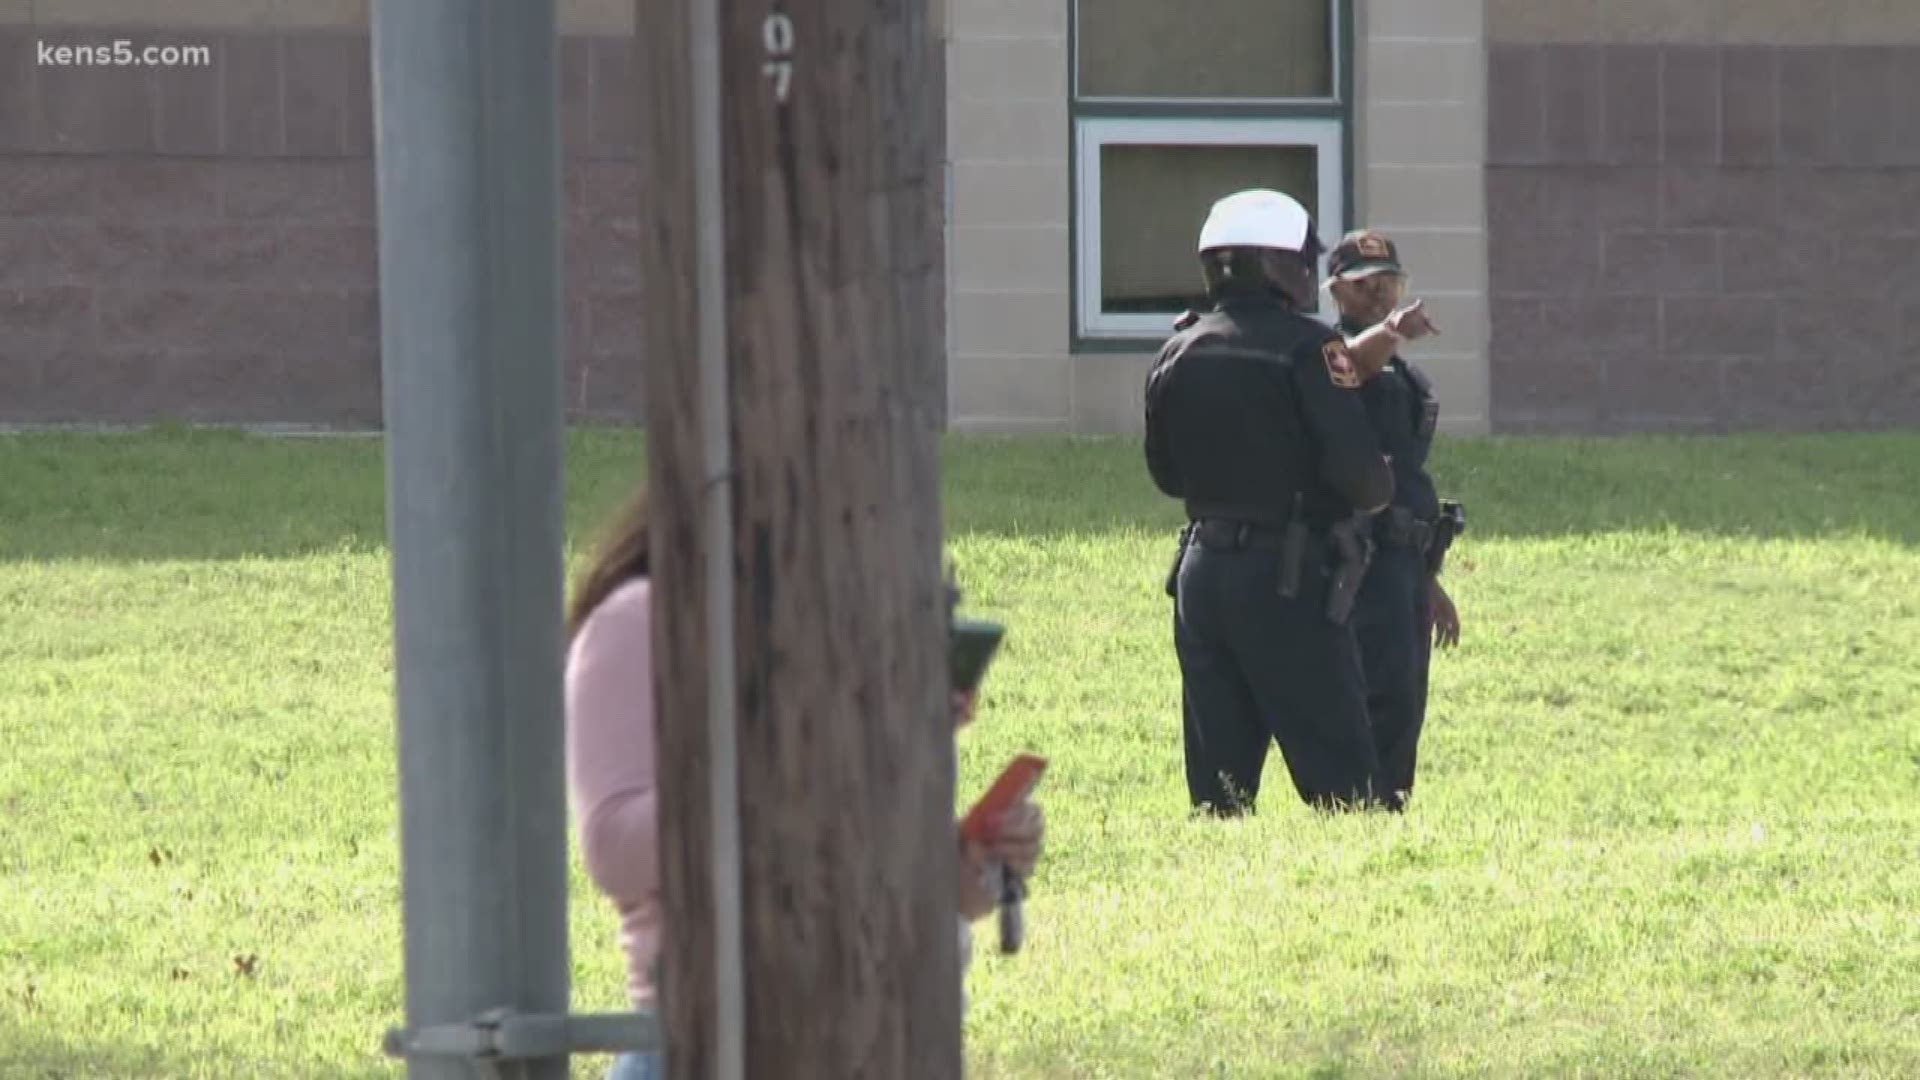 The standoff eventually involved a SWAT team, and put a nearby public school on lockdown.